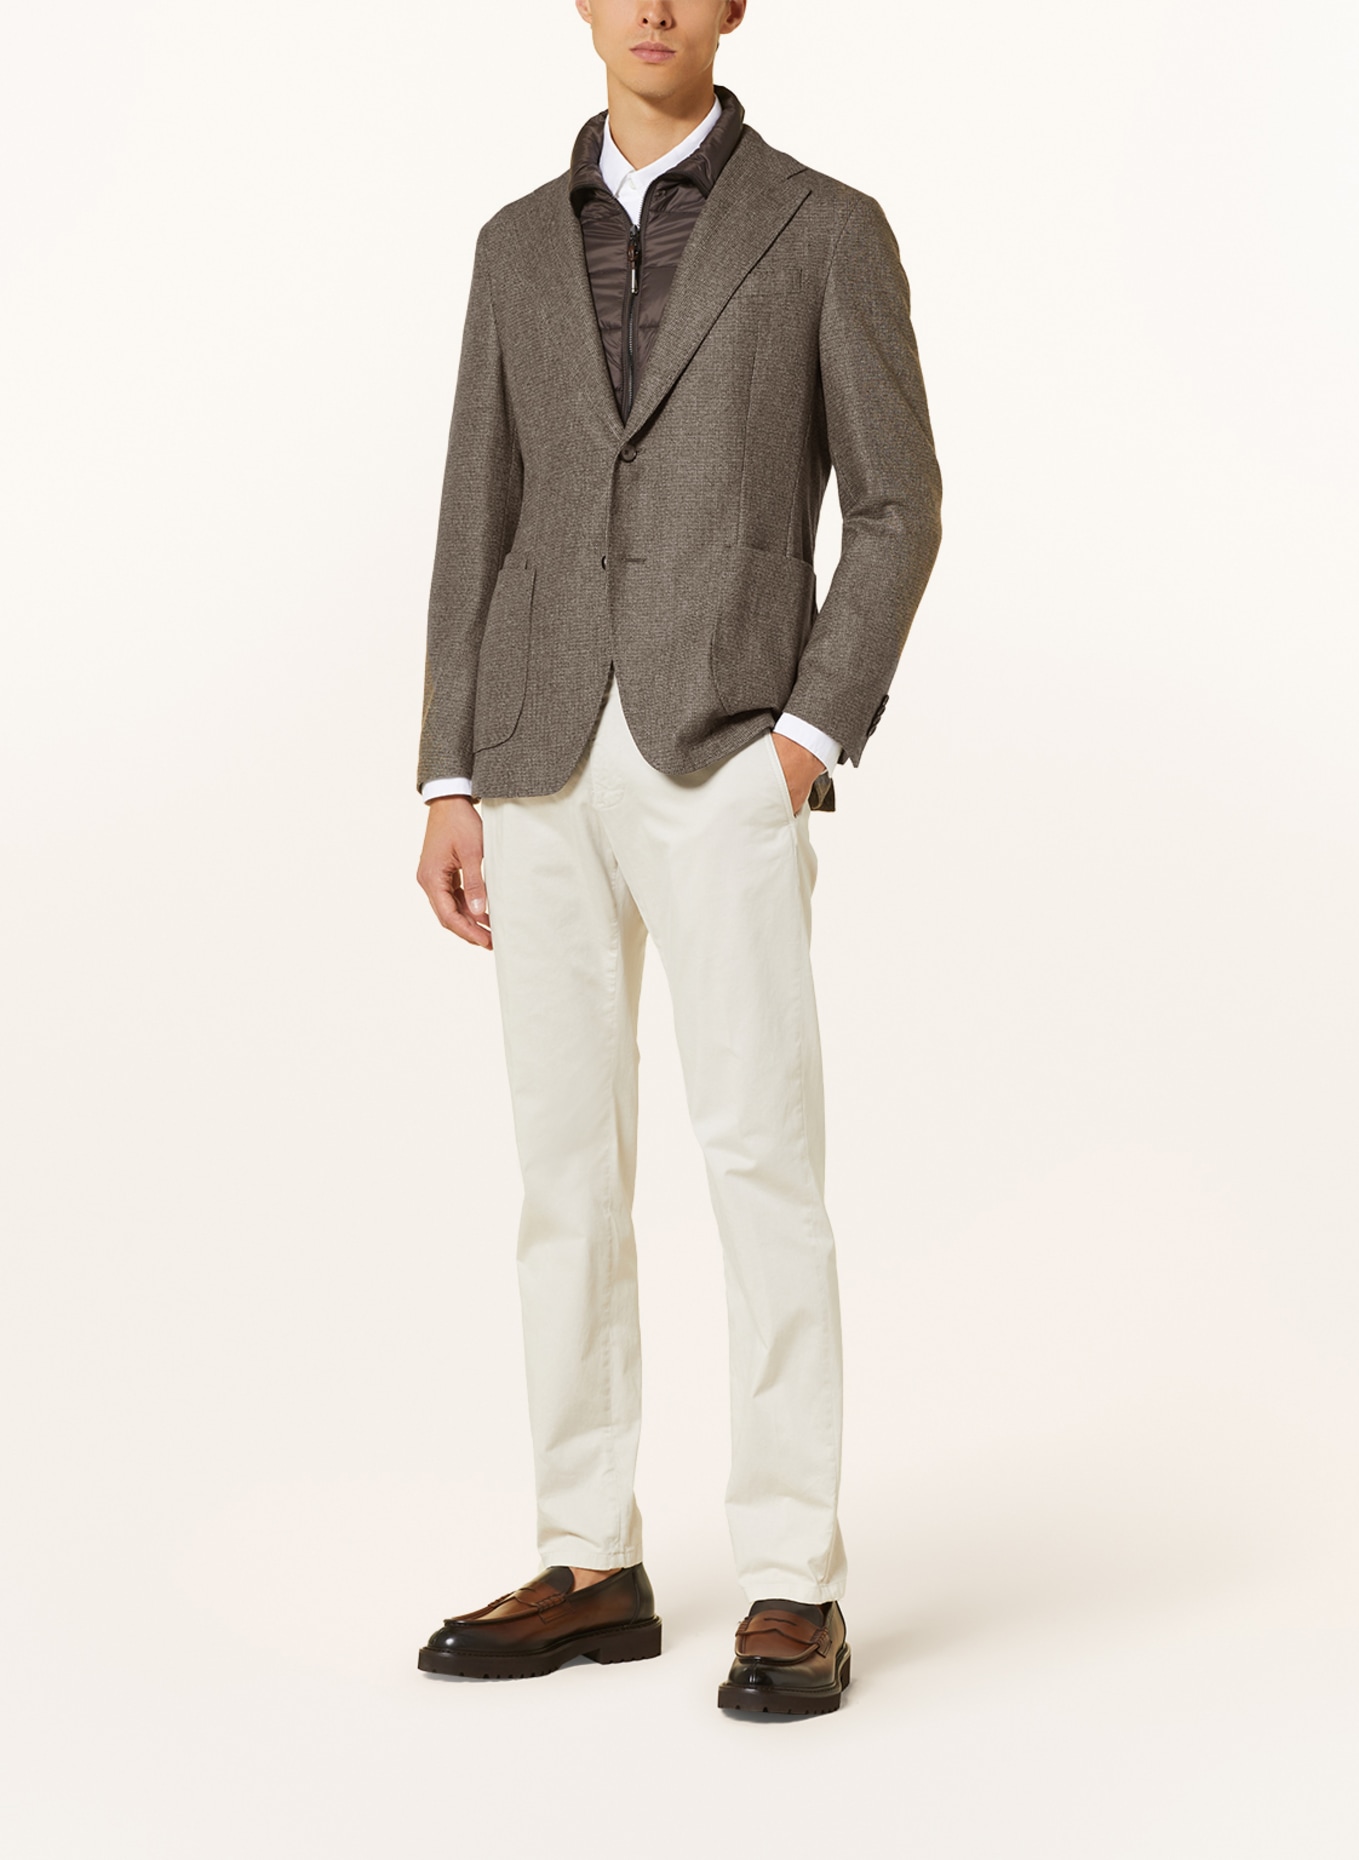 windsor. Tailored jacket TRIEST extra slim fit with detachable trim, Color: DARK BROWN/ BEIGE (Image 2)